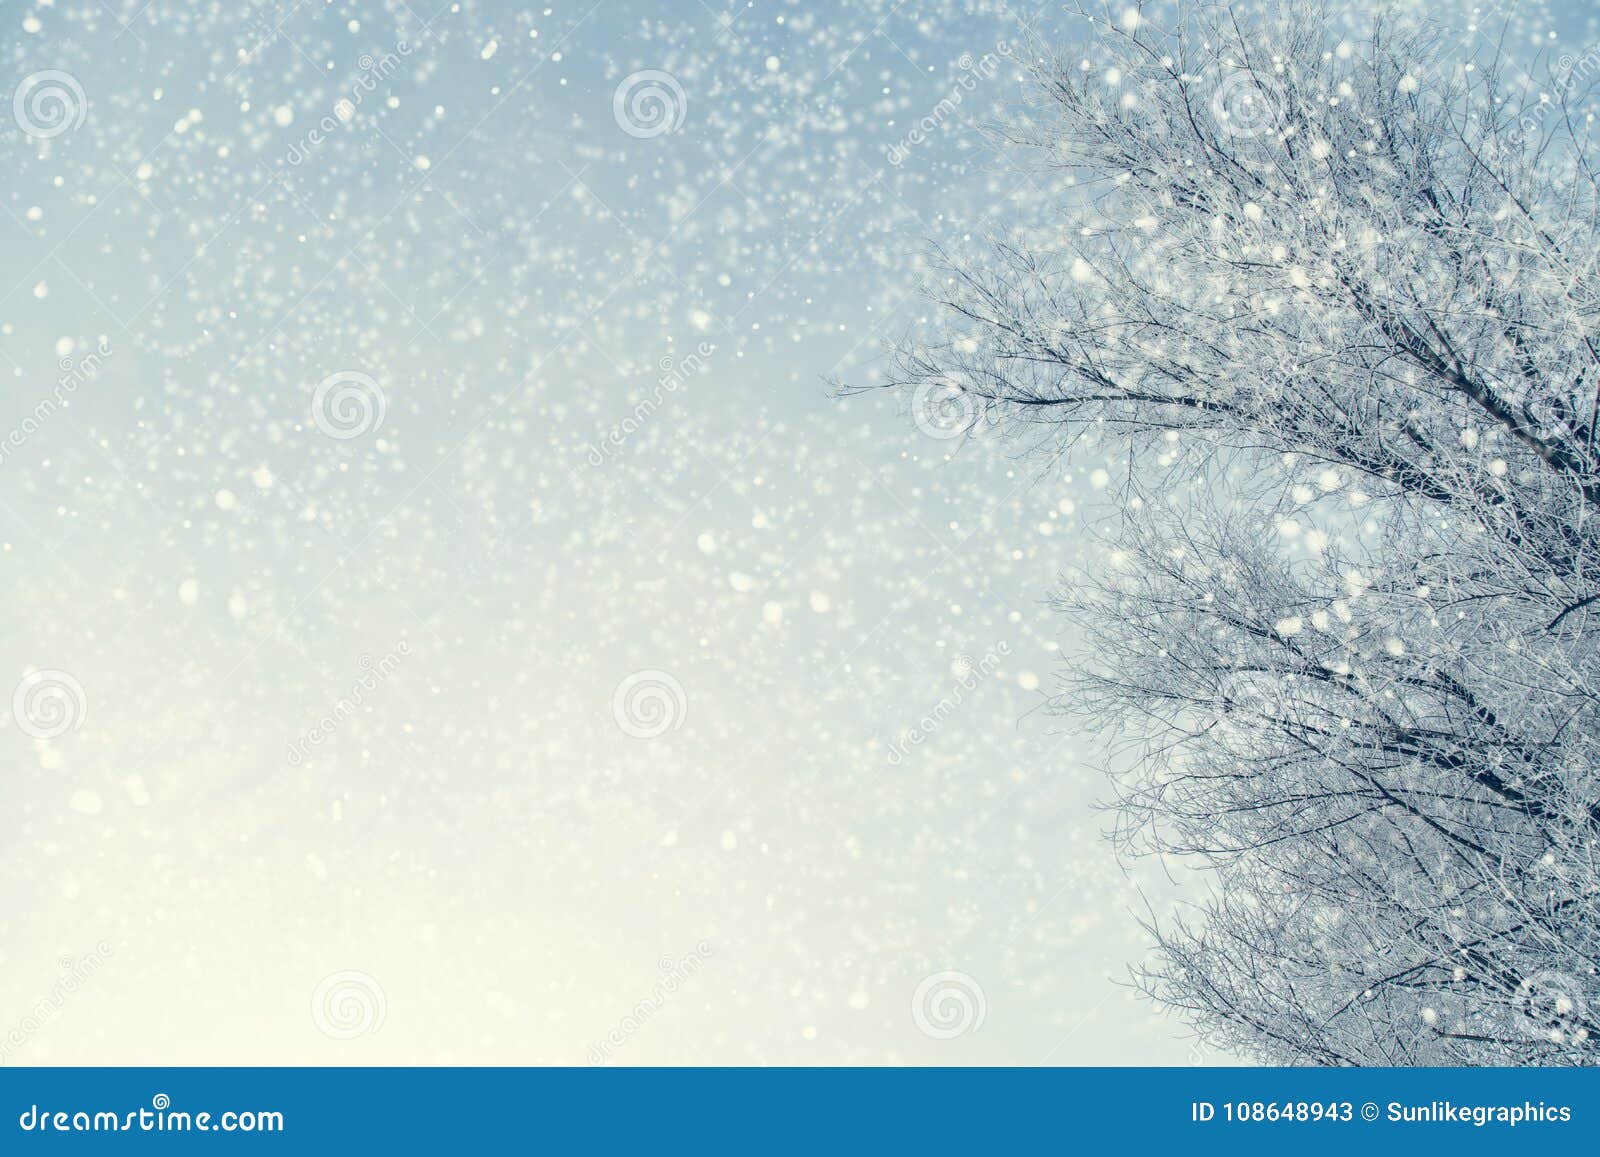 frame of snowy tree branches against blue sky during the snowfall with copy space for text. winter landscape.